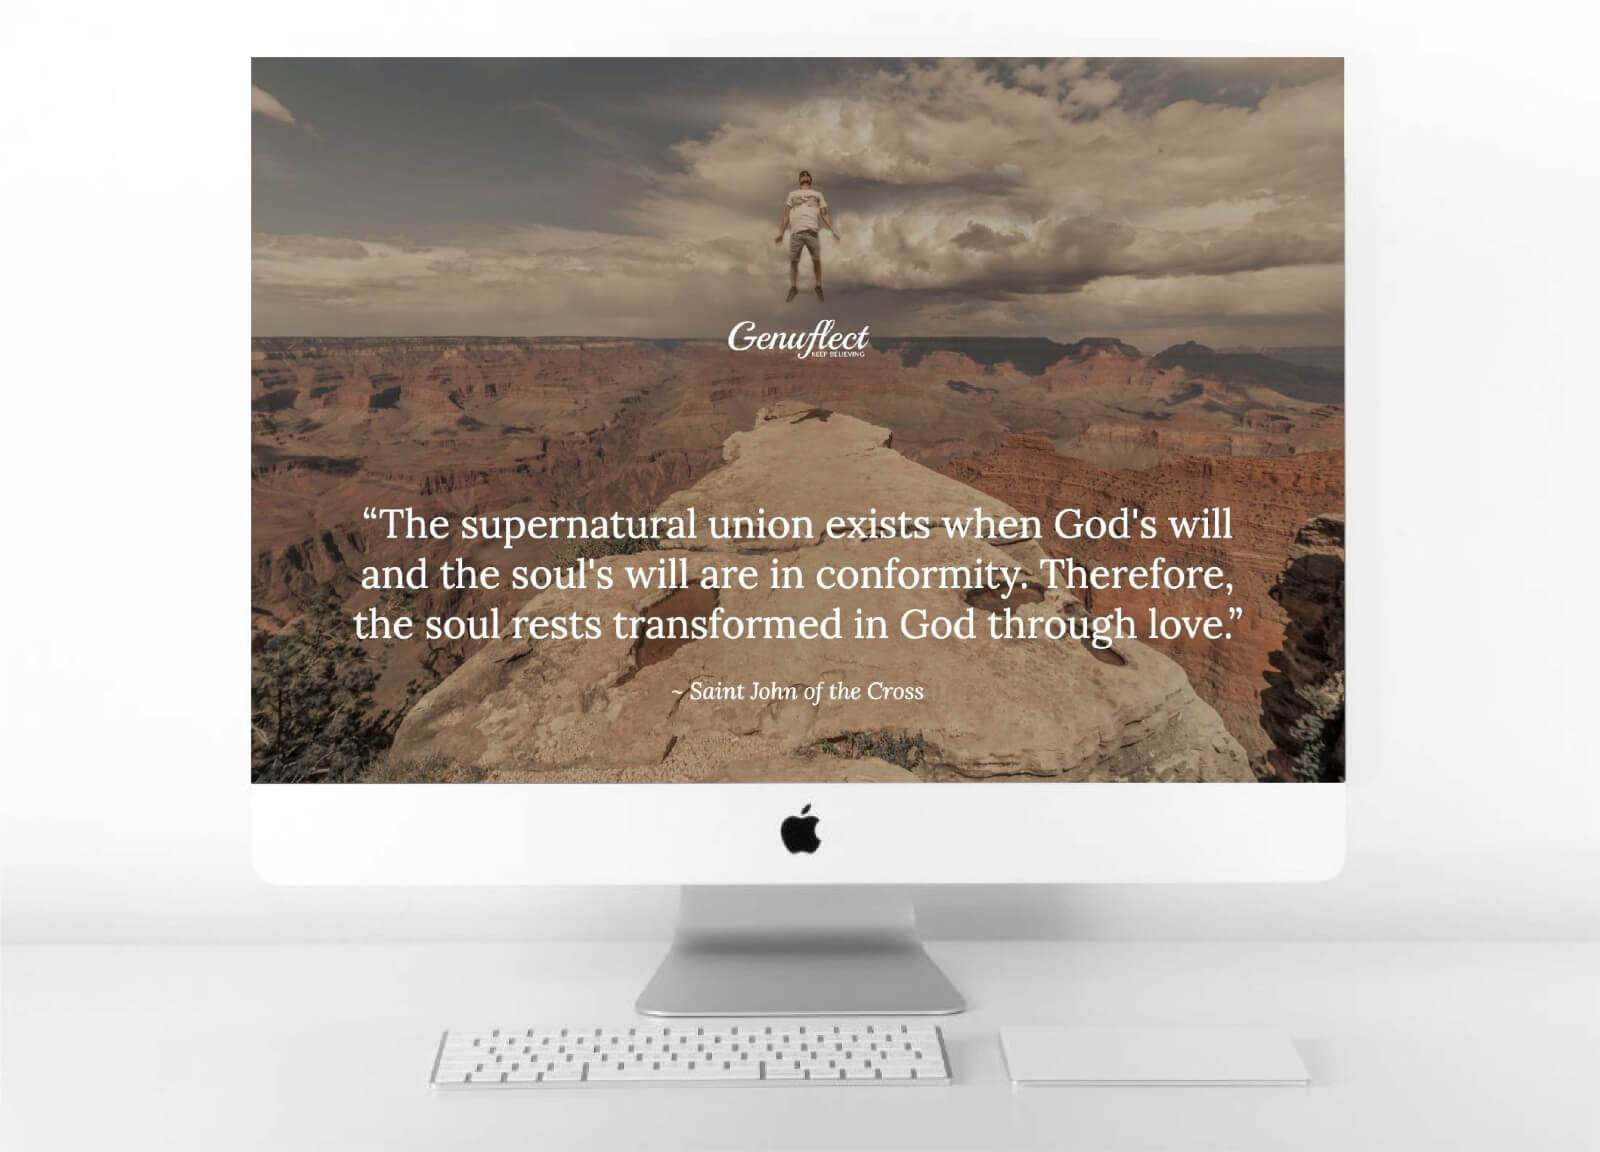 Genuflect - Computer background image of a Man levitating in the sky above a canyon